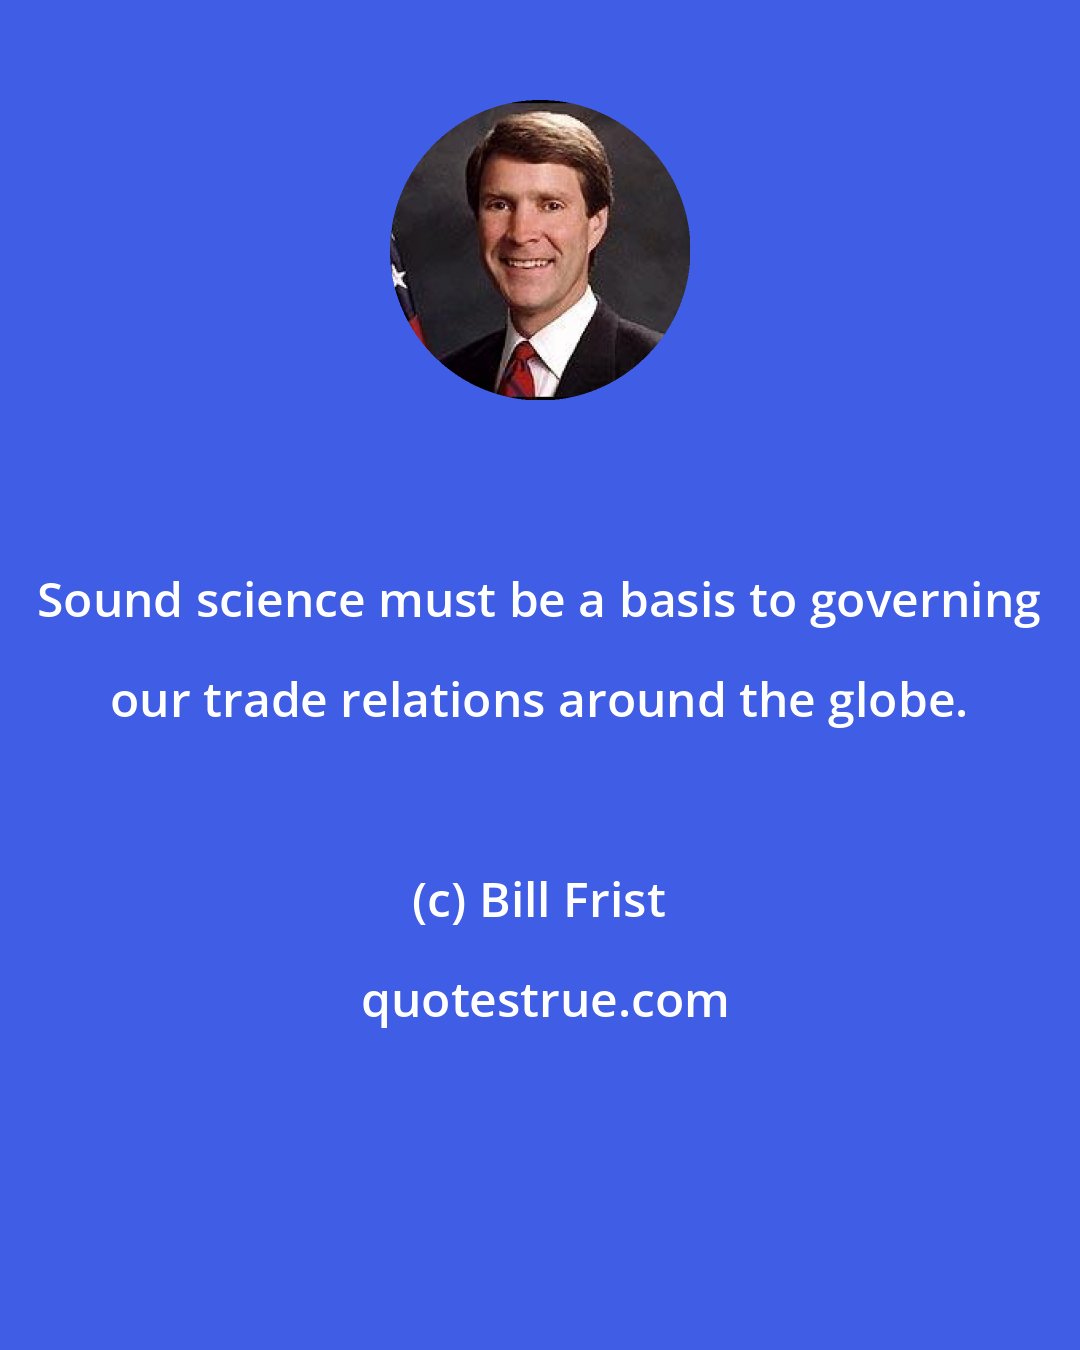 Bill Frist: Sound science must be a basis to governing our trade relations around the globe.